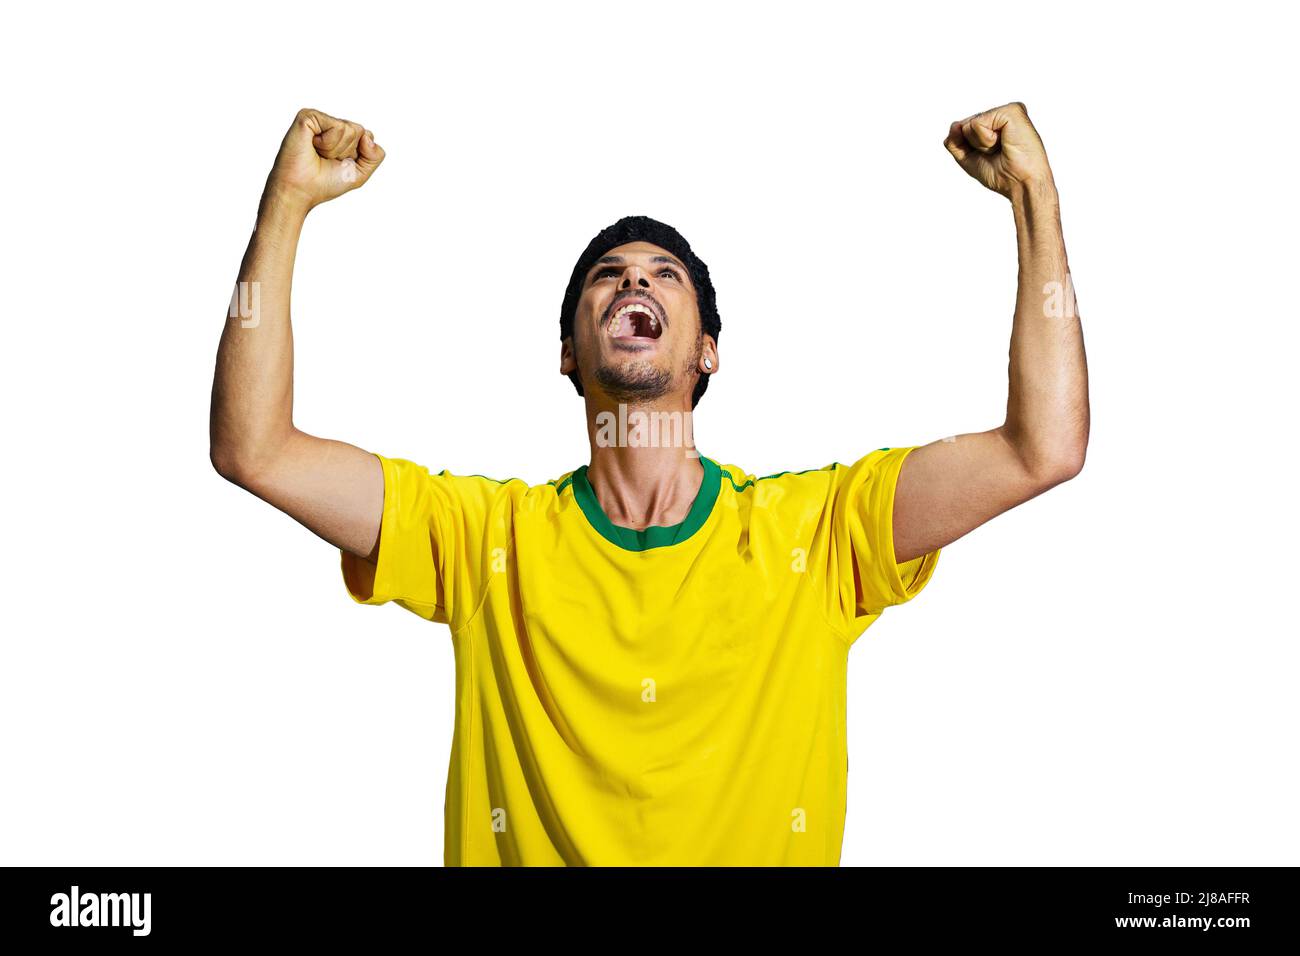 Male athlete or fan in yellow uniform celebrating isolated Stock Photo